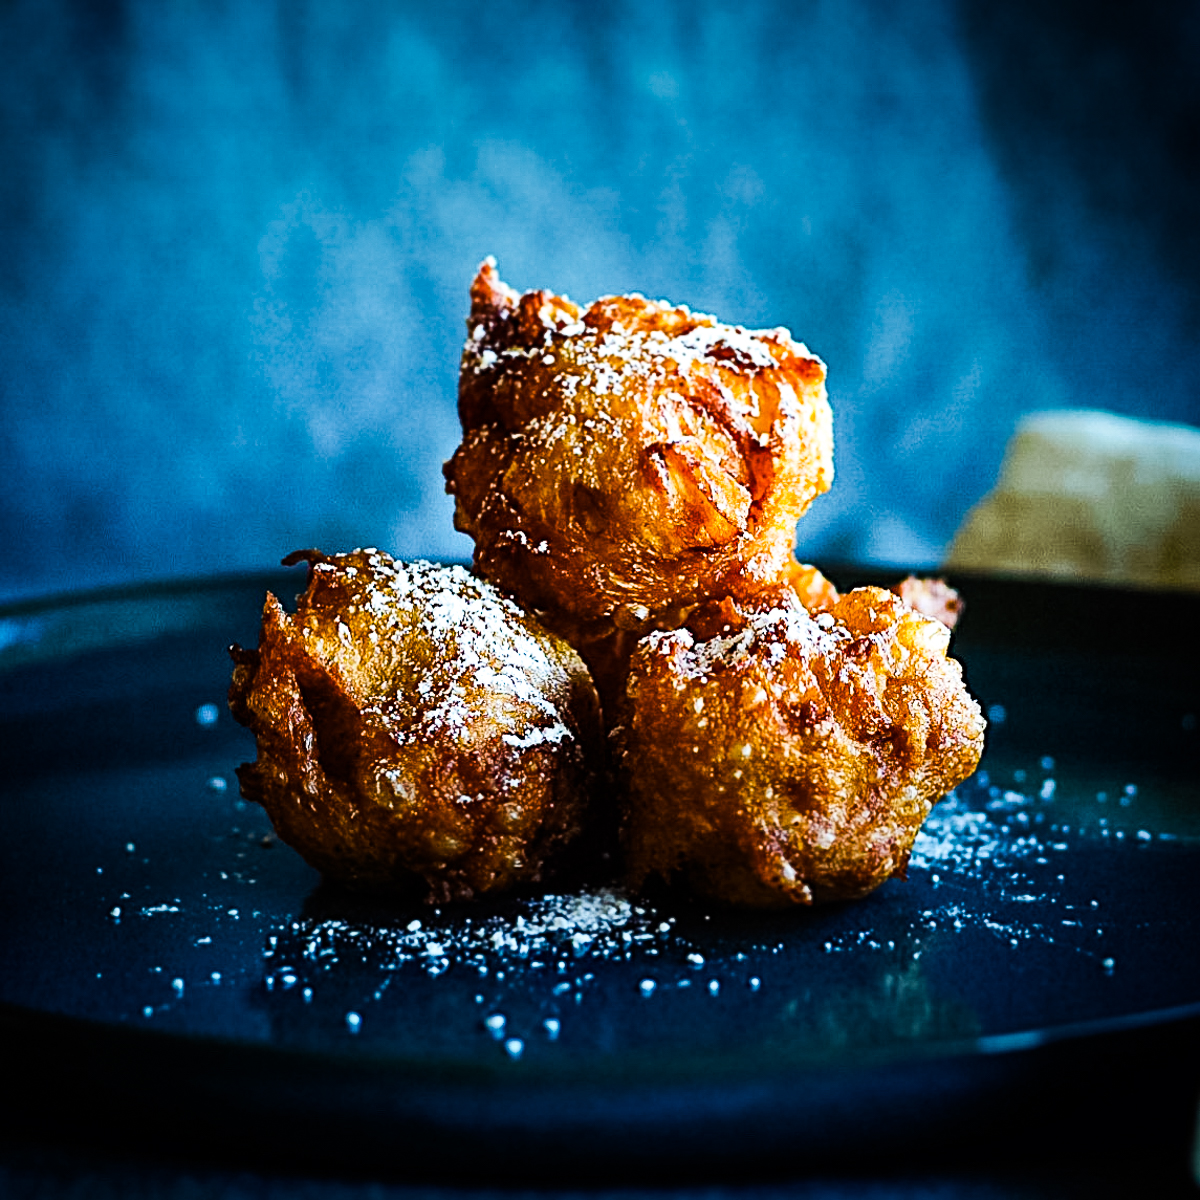 Three rustic but round apple beignets on a large round blue plate. They are golden brown and dusted with icing sugar.